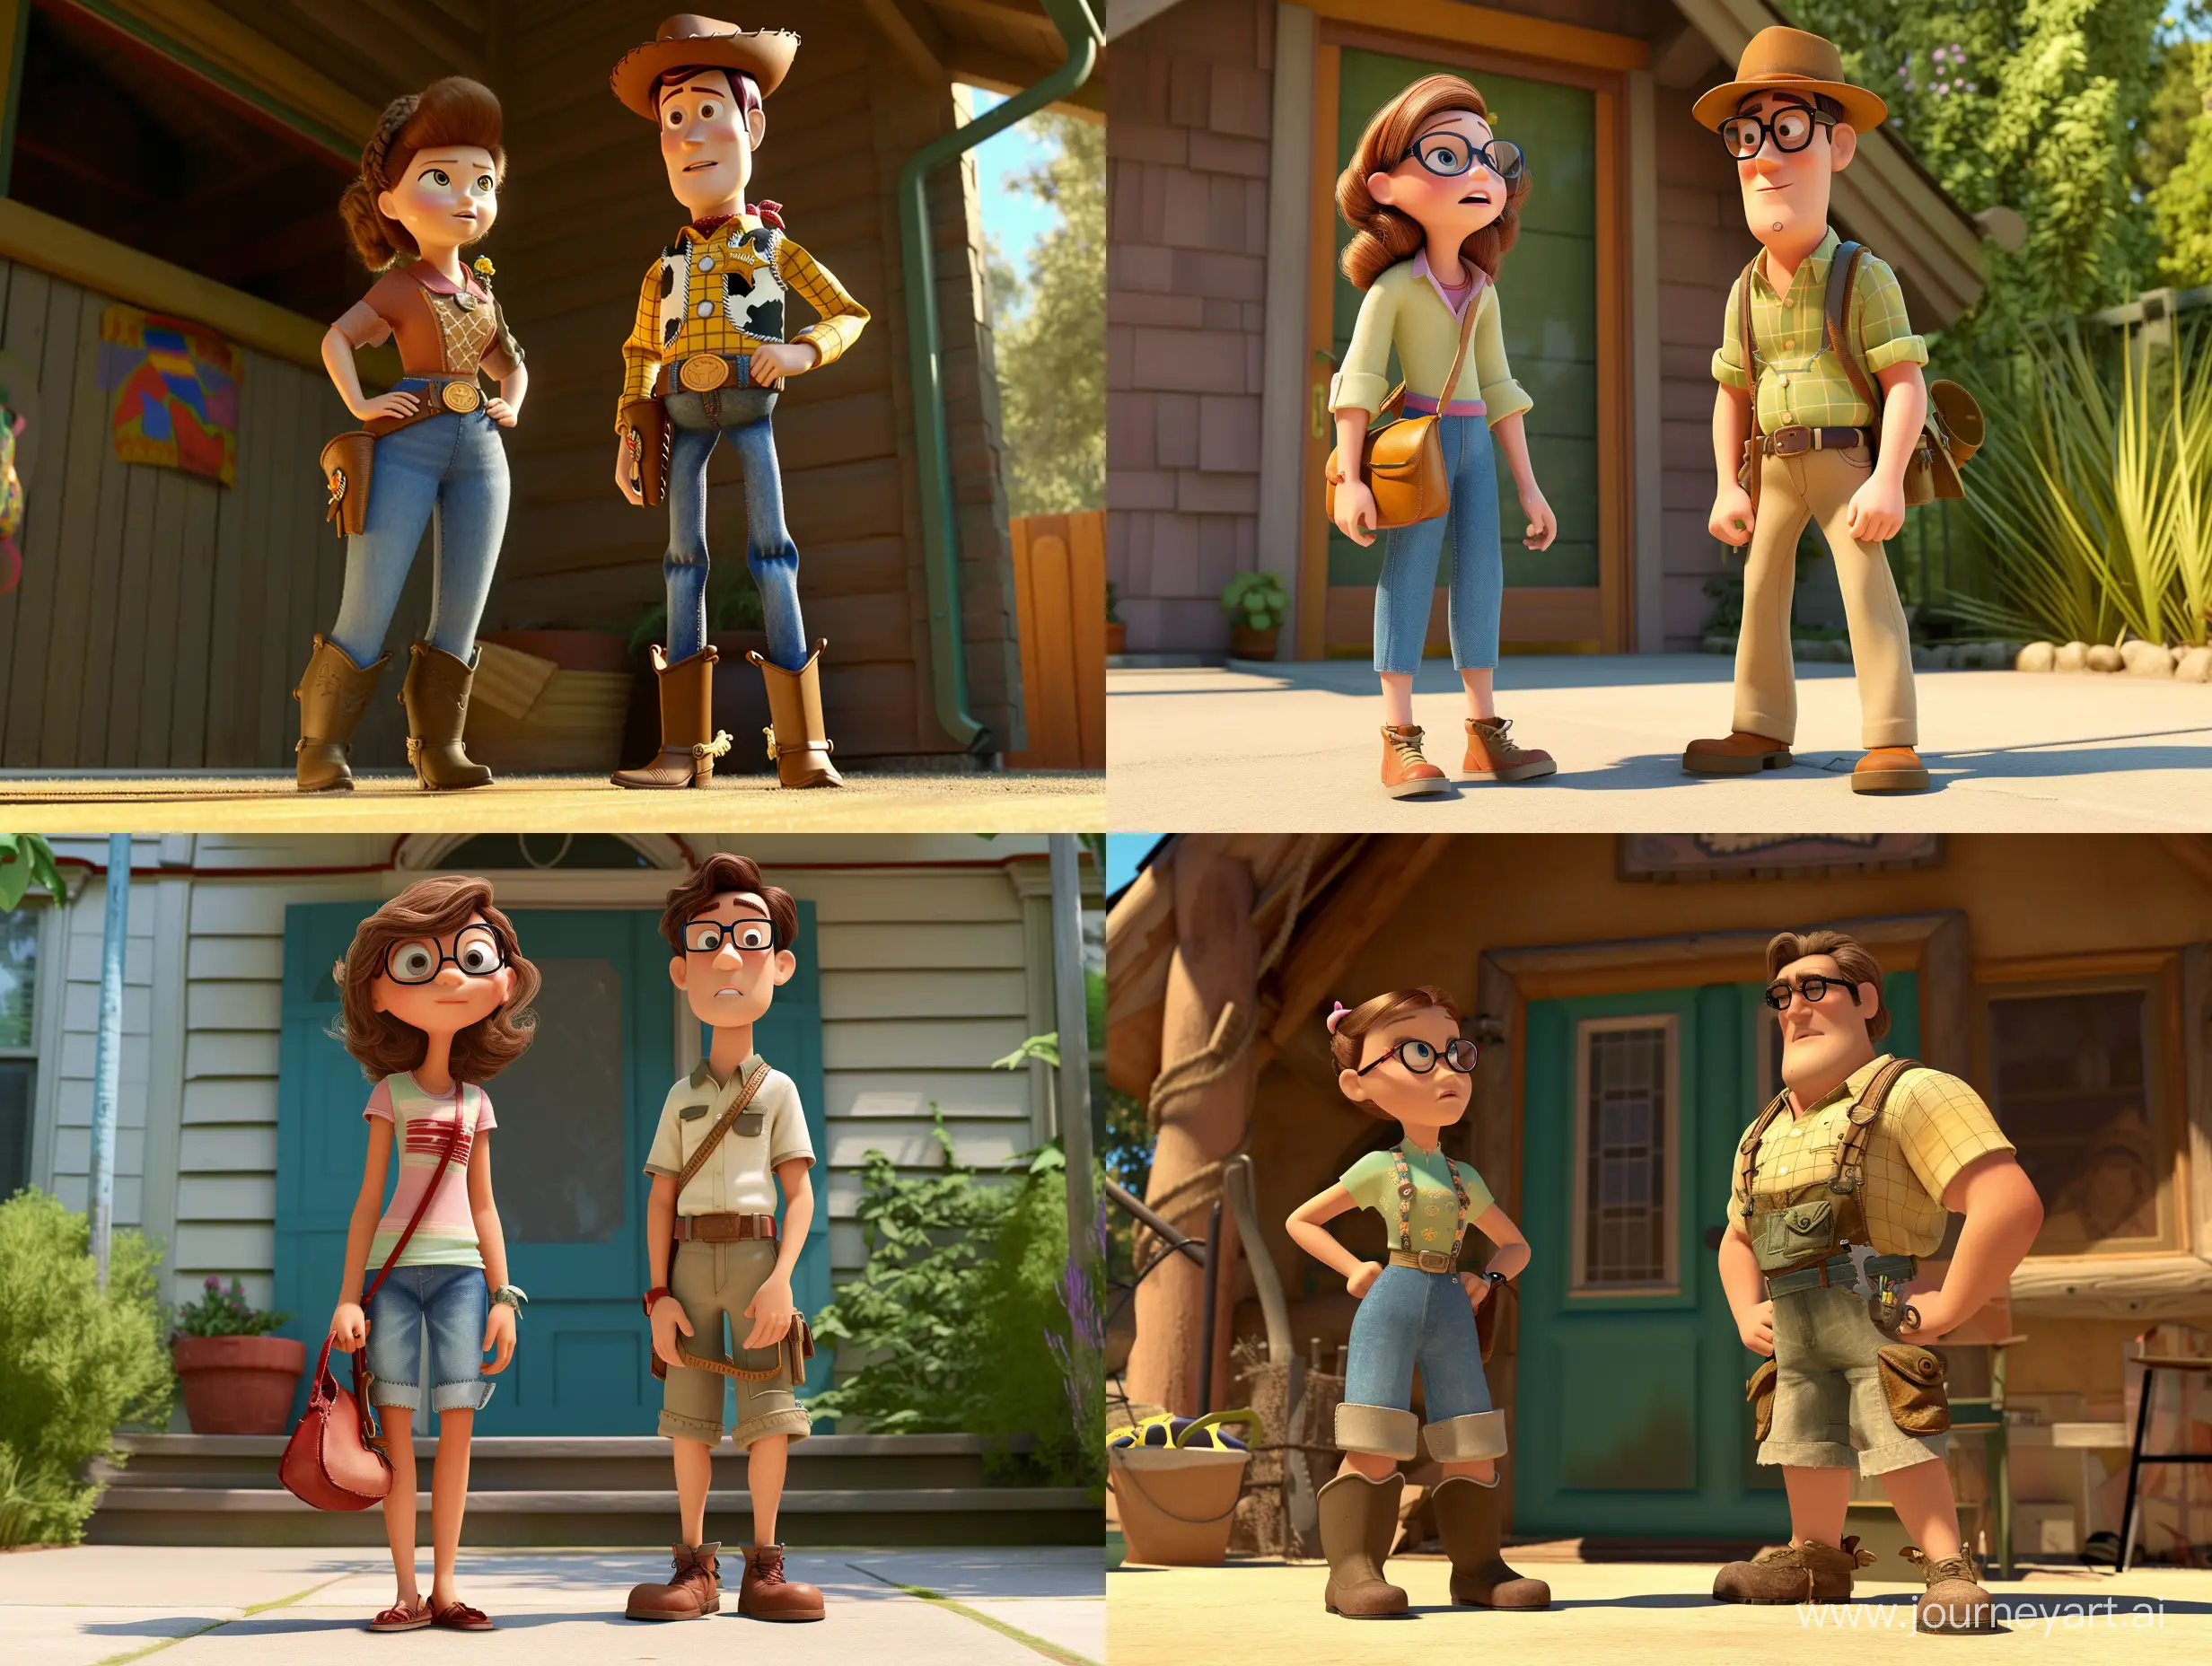 Animated-Couple-with-Accessories-in-Outdoor-Setting-Pixar-Movie-Scene